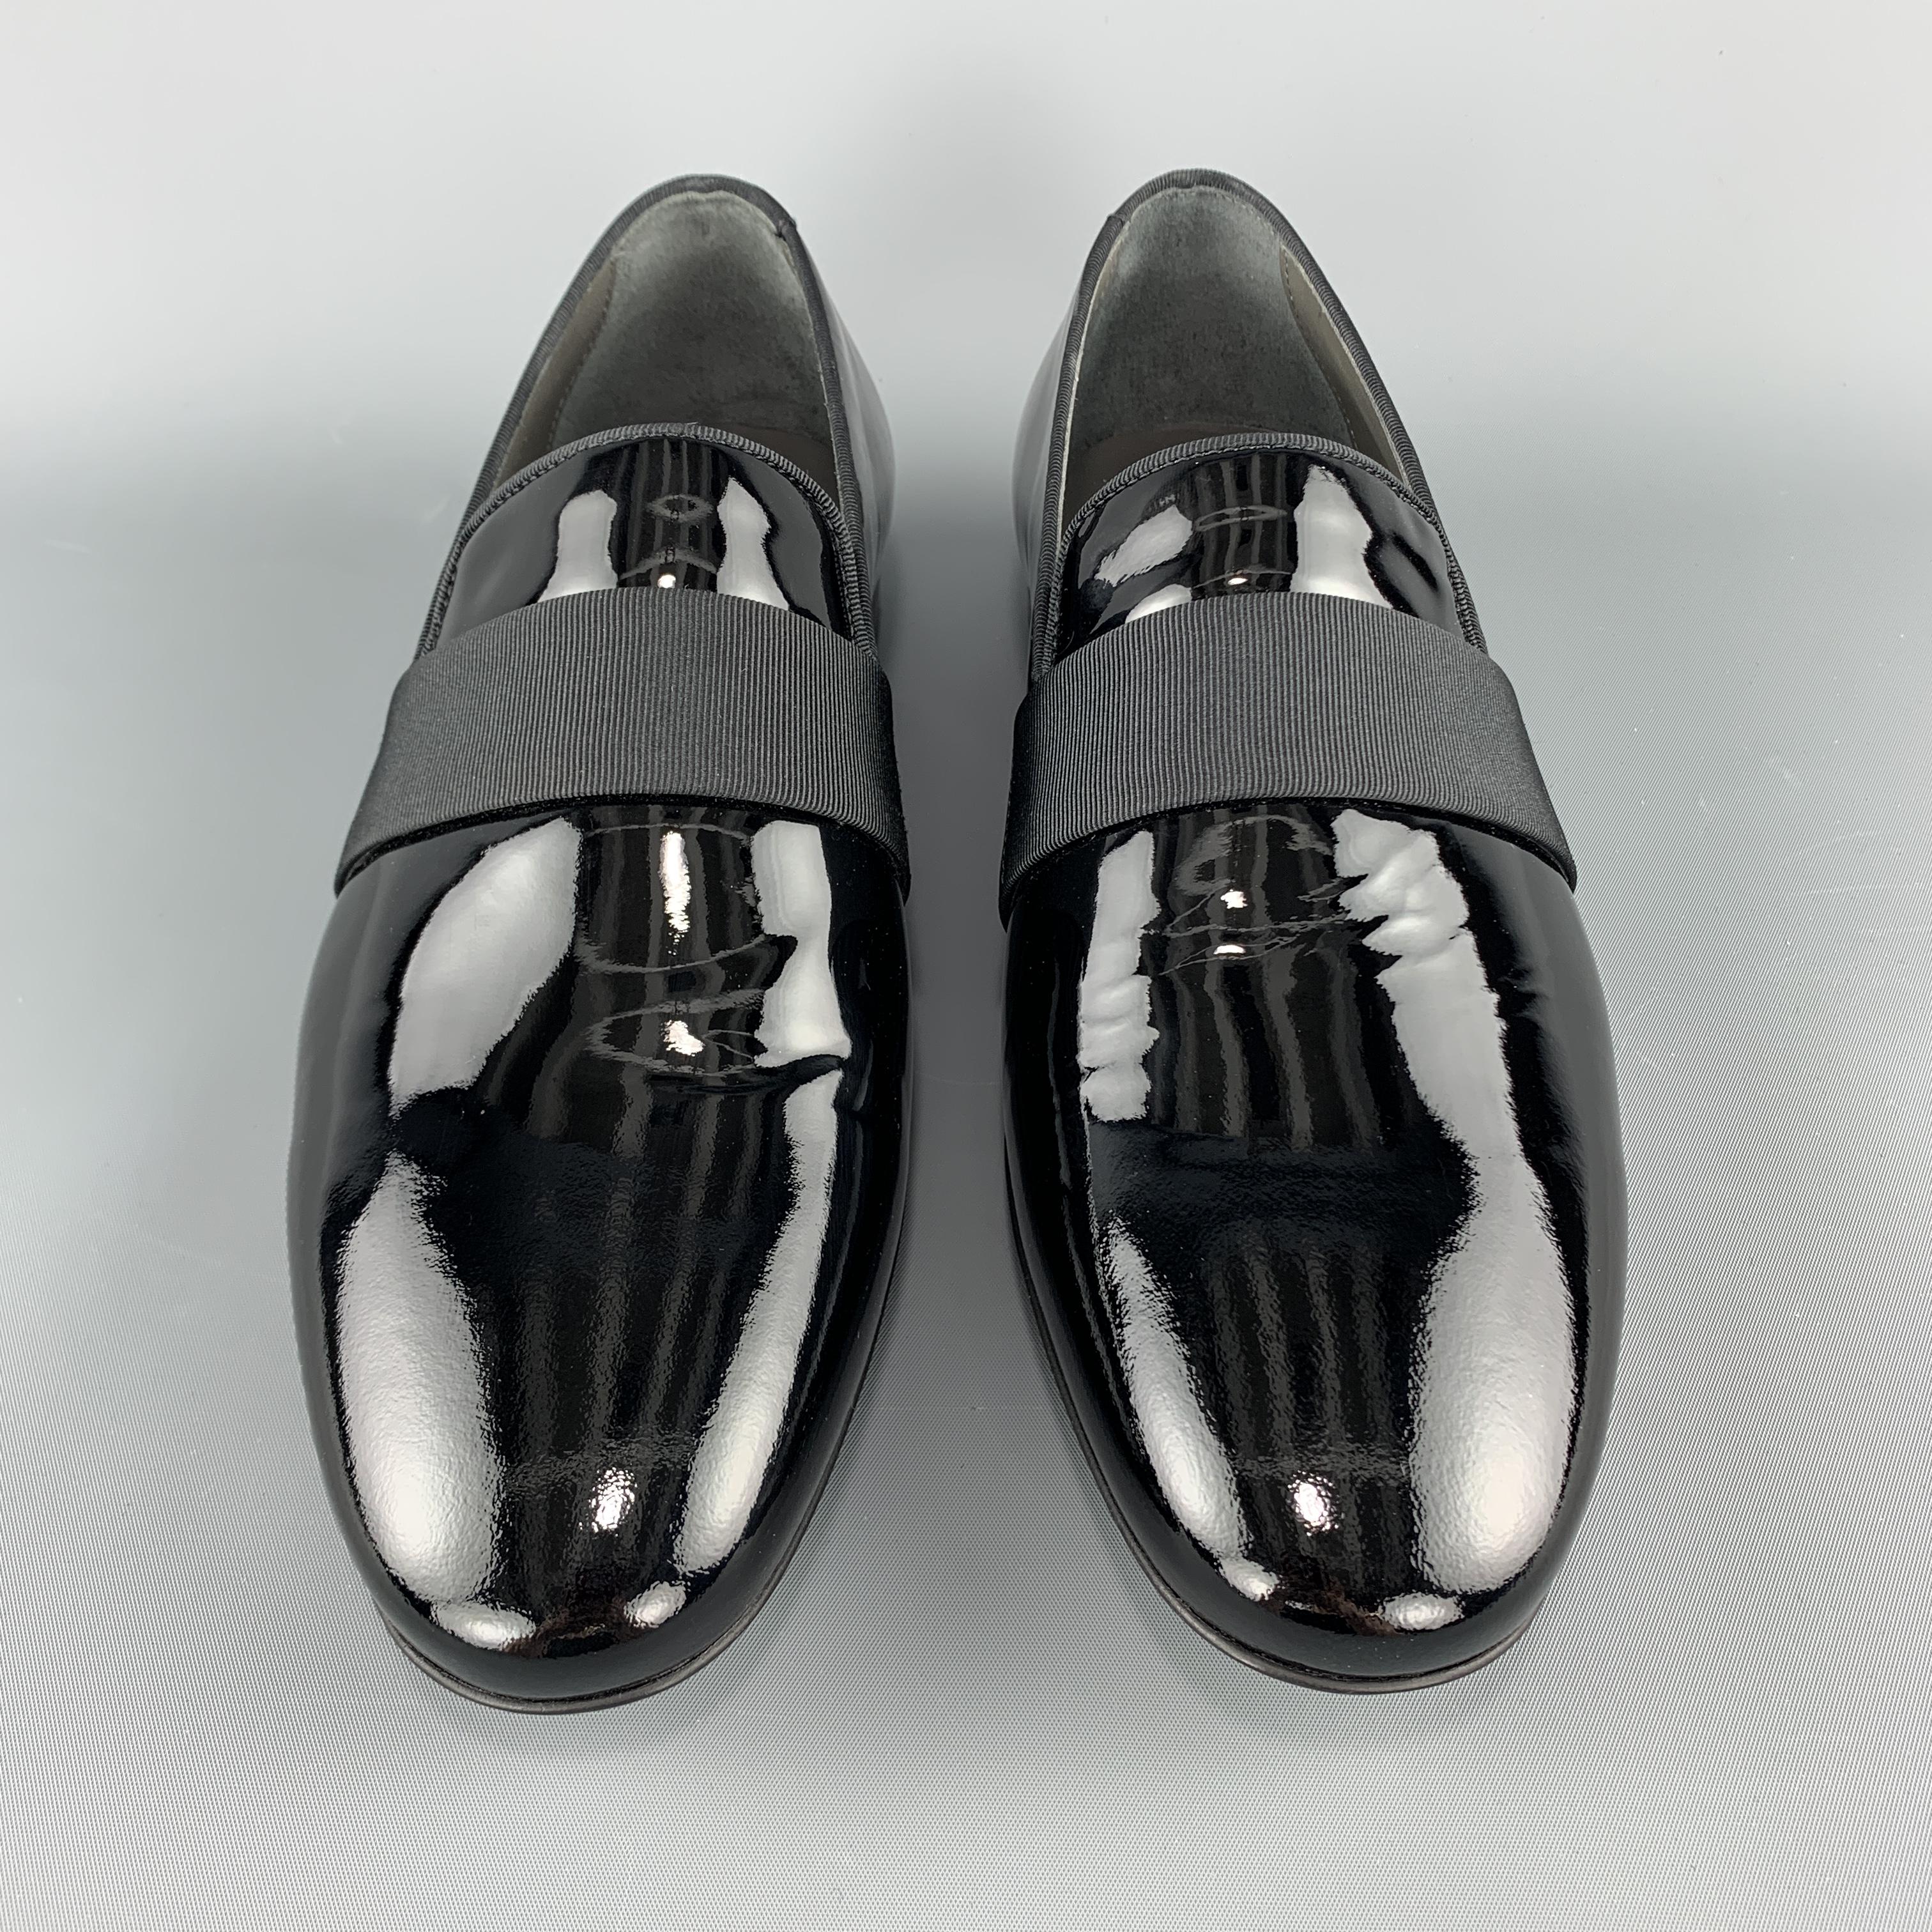 LANVIN tuxedo slippers come in black patent leather with piping and ribbon strap detail. Made in Portugal.

New with Box.
Marked:
Original Retail Price: $625.00

Outsole: 11.25 x 3.75 in.
